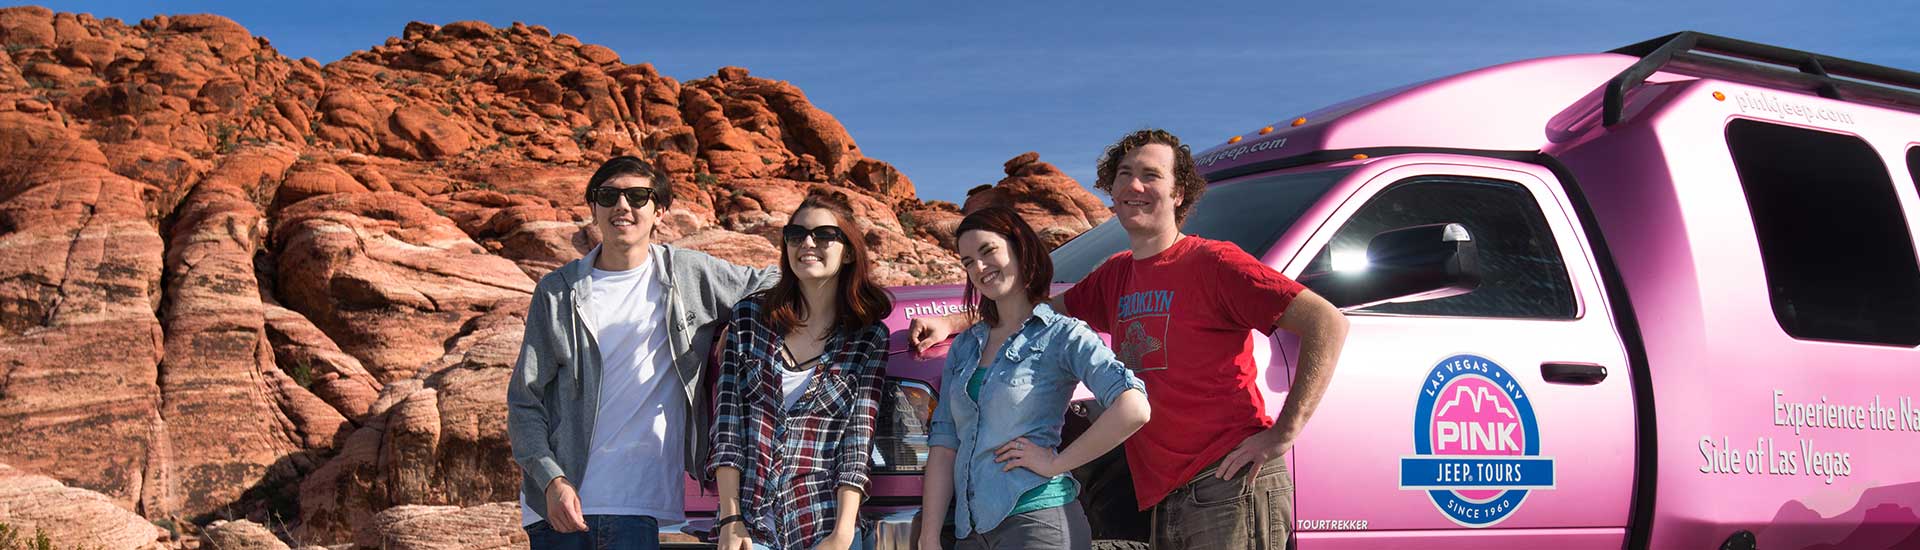 Red Rock Canyon Tours Las Vegas Guided Tours Pink Jeep Tours